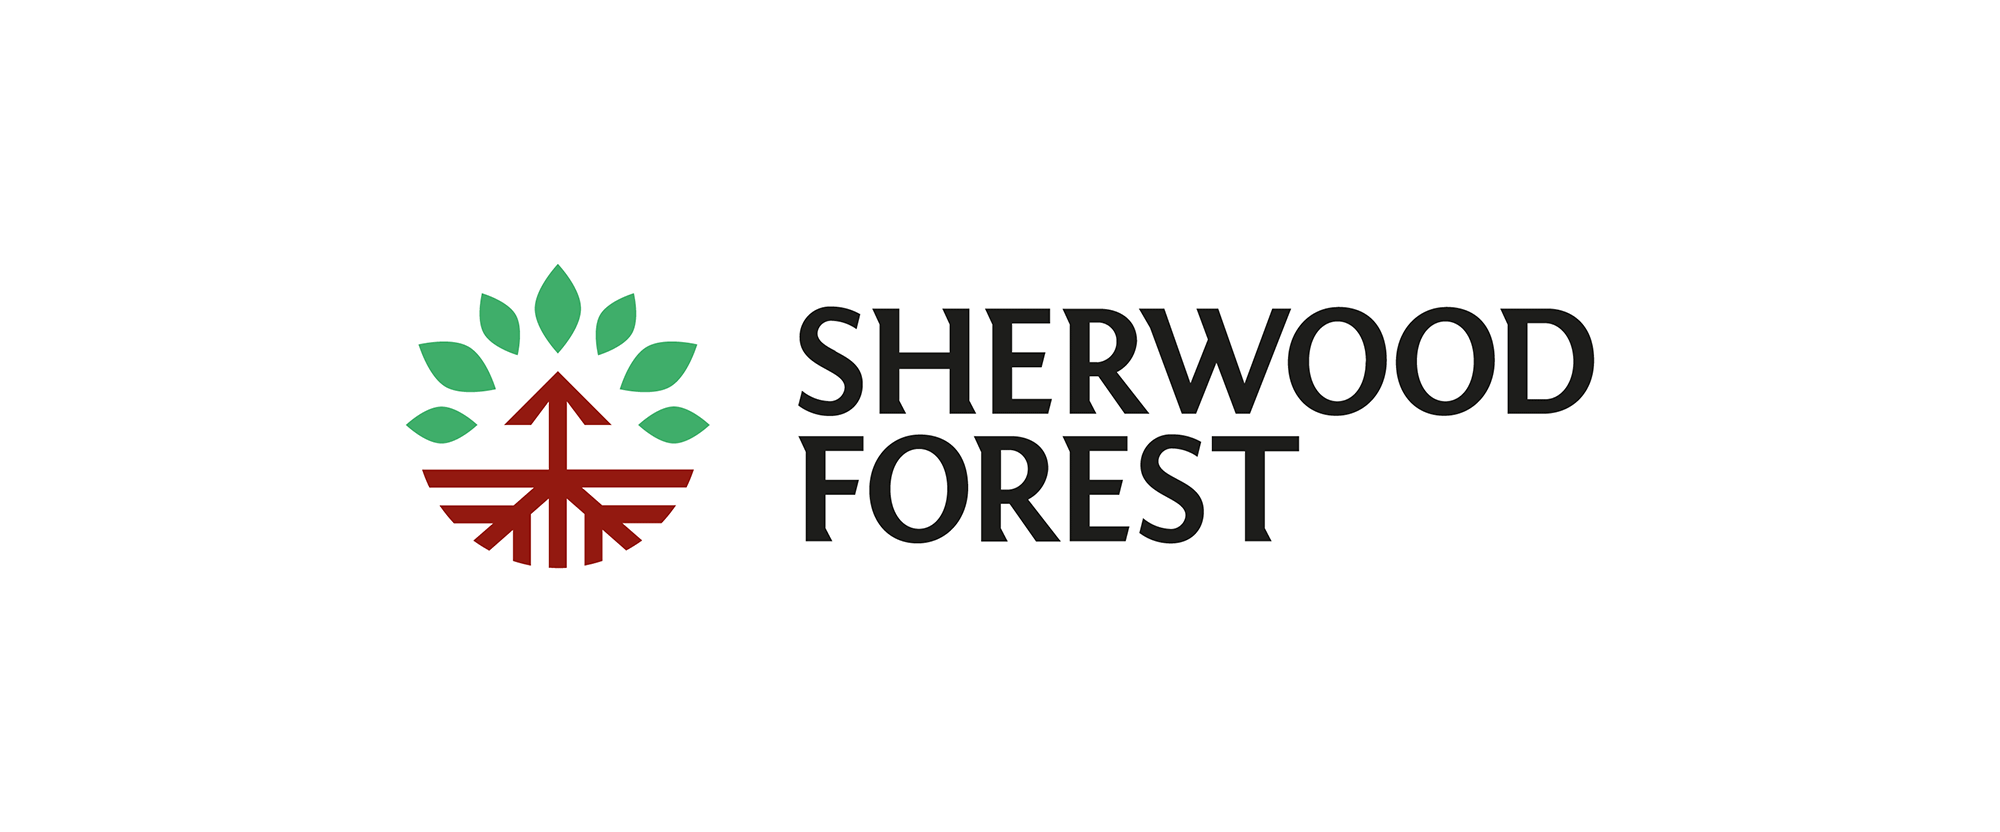 Sherwood Logo - Brand New: New Logo and Identity for Sherwood Forest by Cafeteria